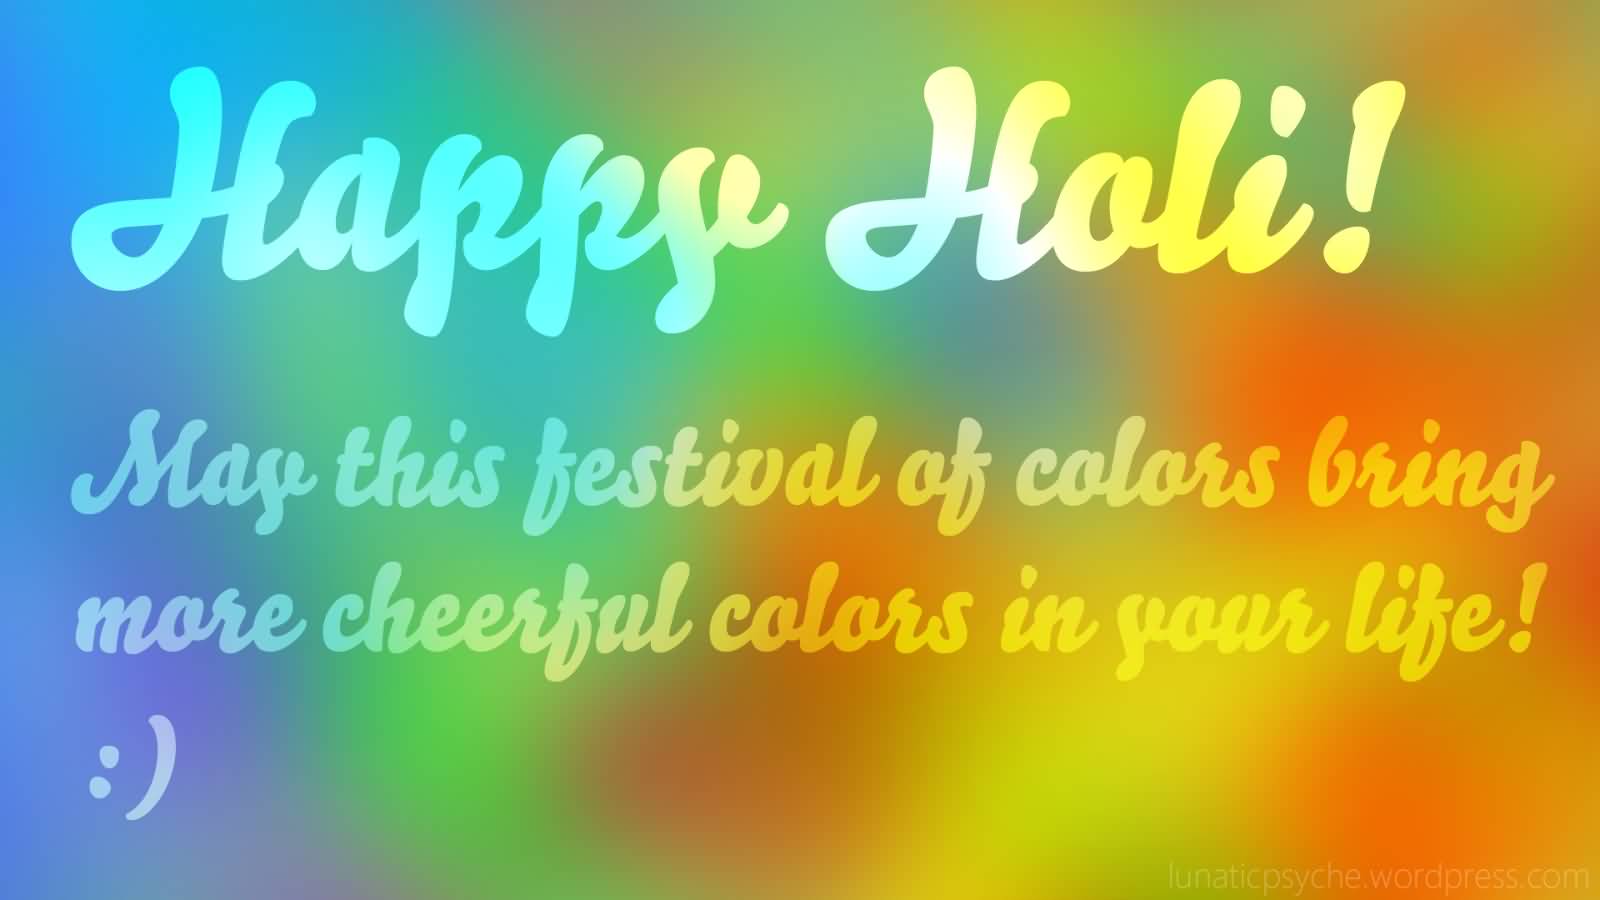 Happy Holi May This Festival Of Colors Bring More Cheerful Colors In Your Life